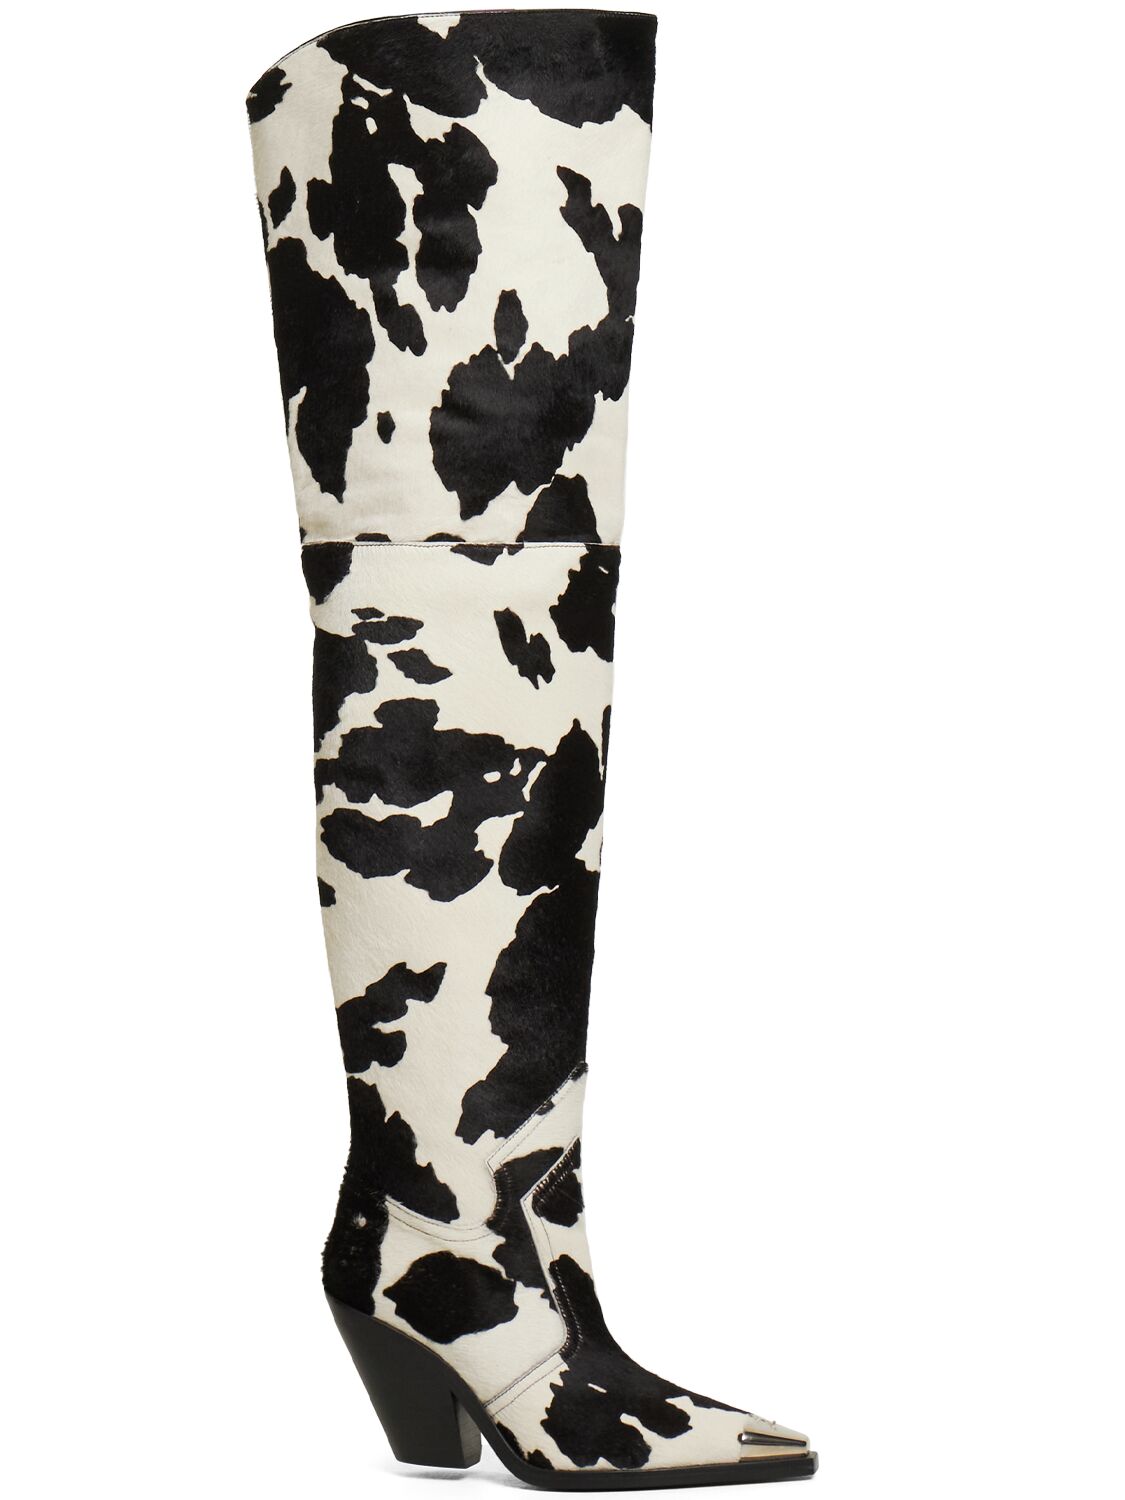 Printed Ponyskin Over-the-knee Boots – WOMEN > SHOES > BOOTS